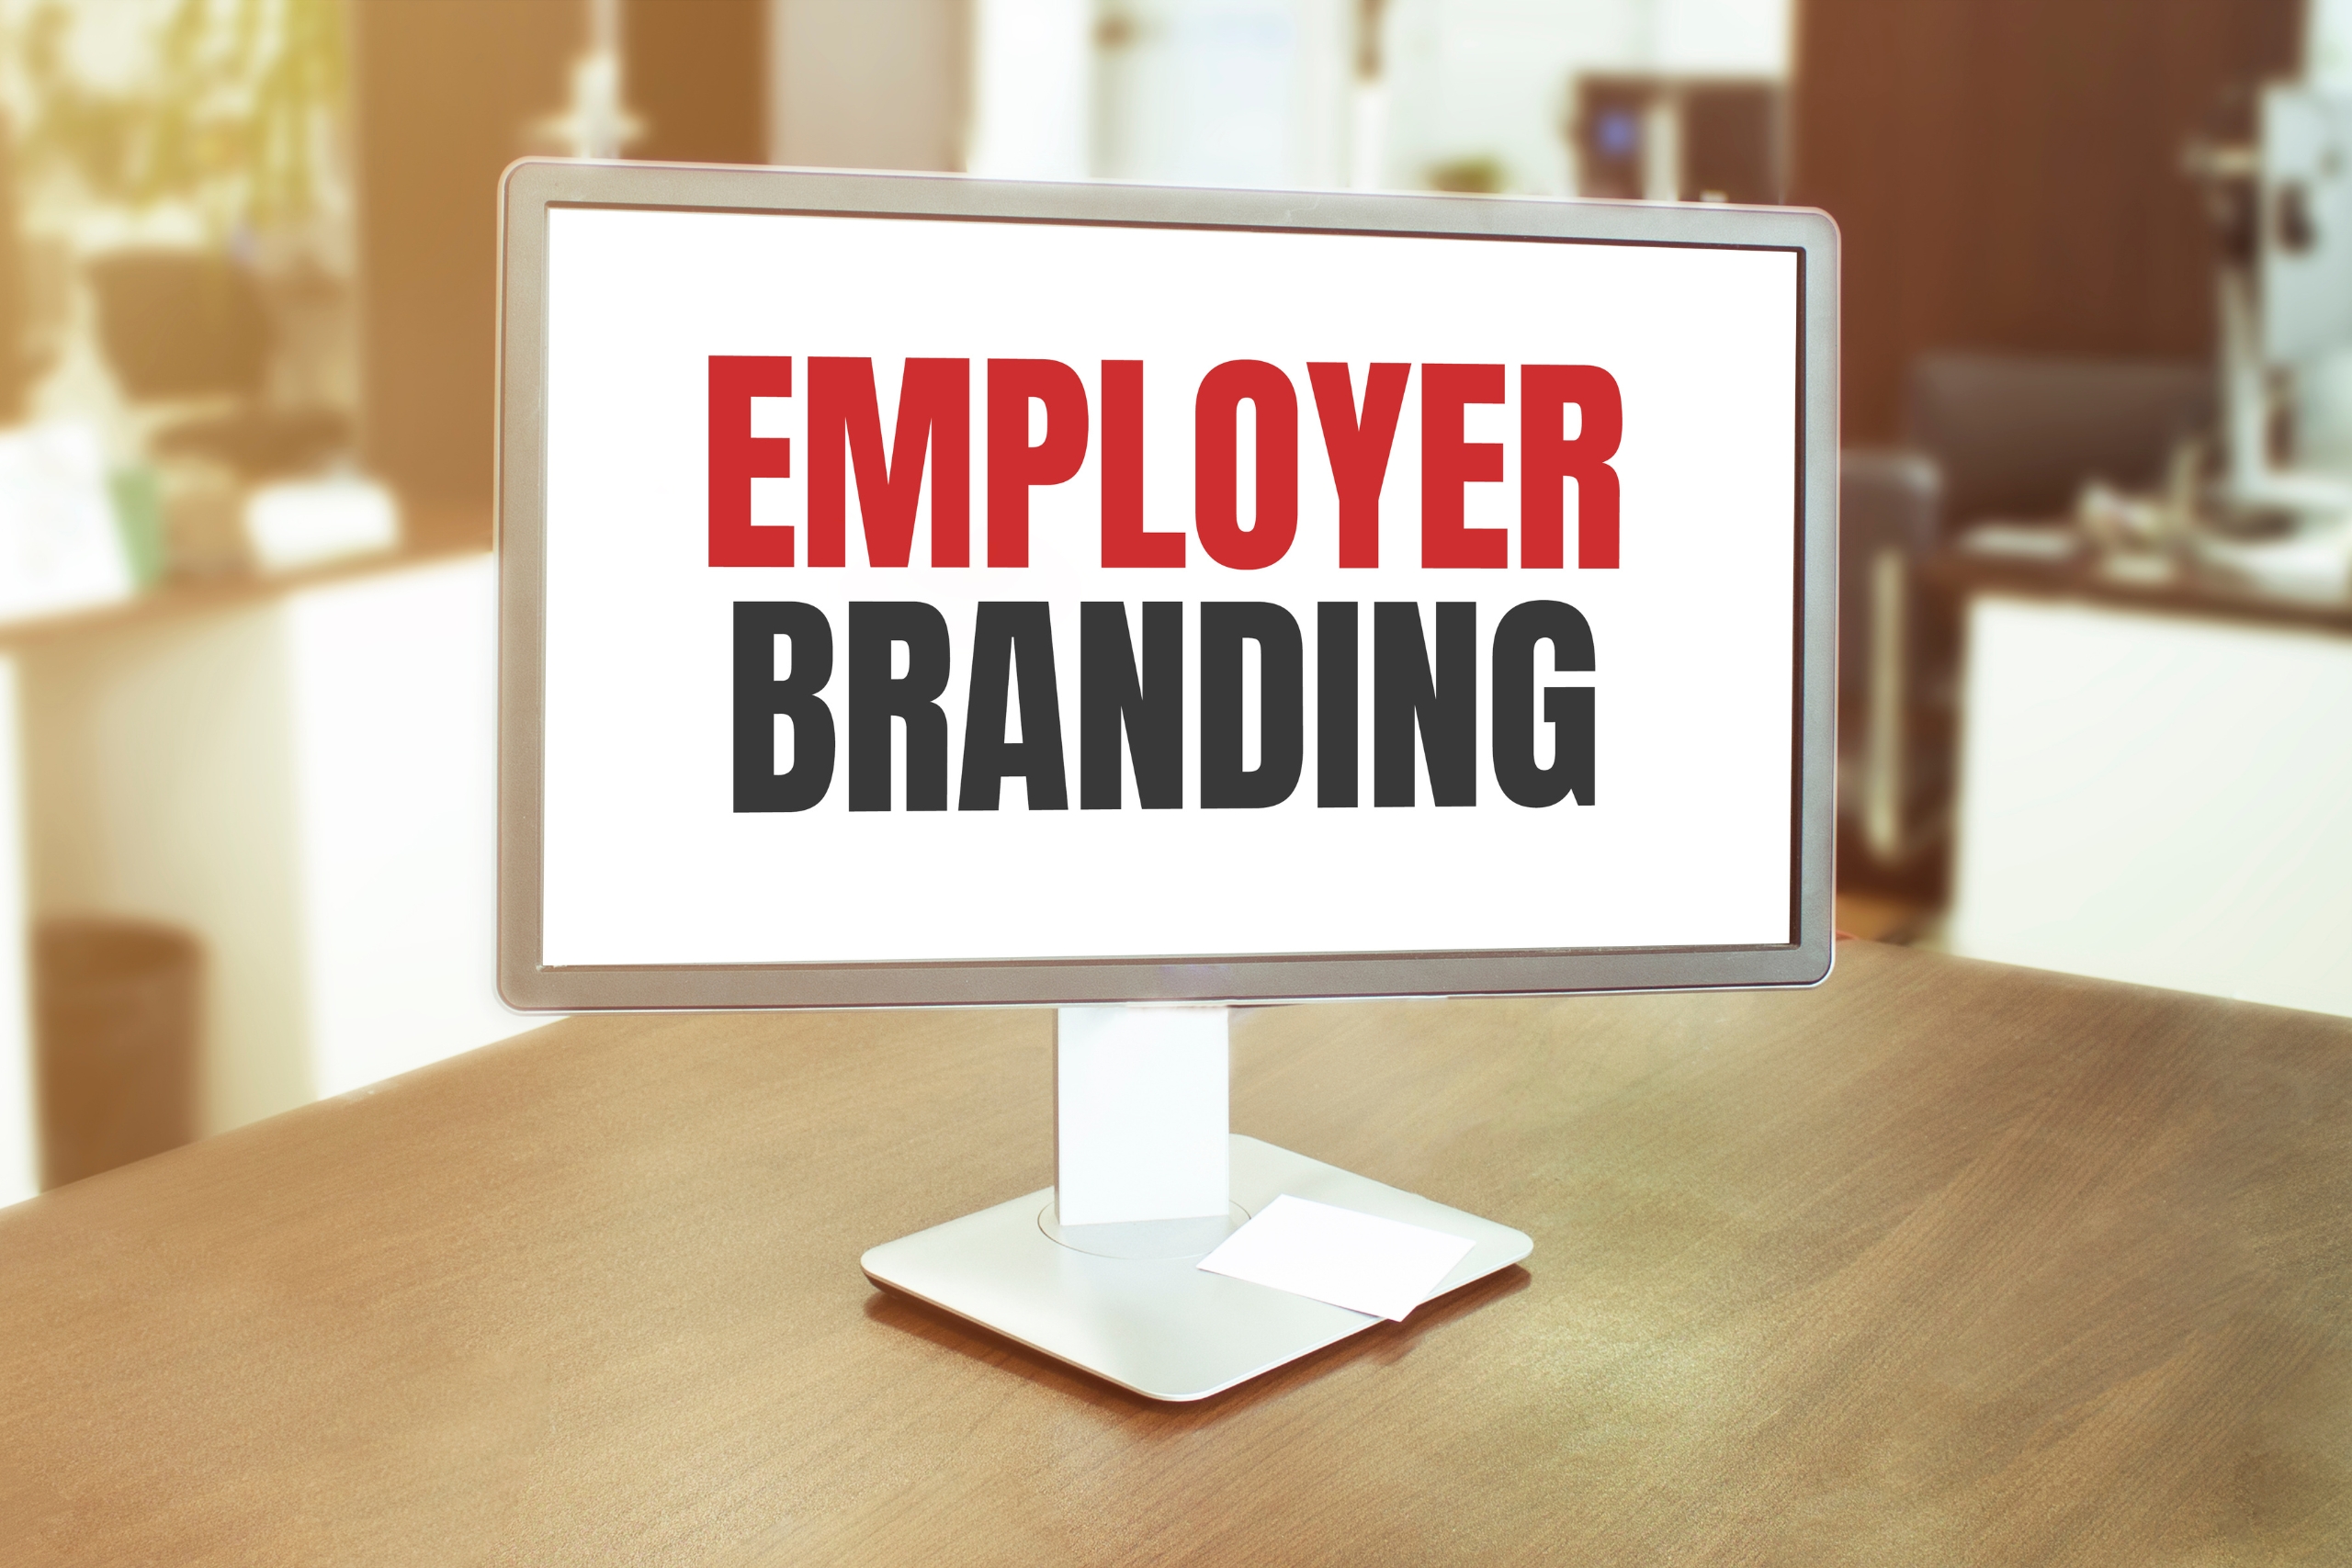 What Is The Objective Of Employee Branding